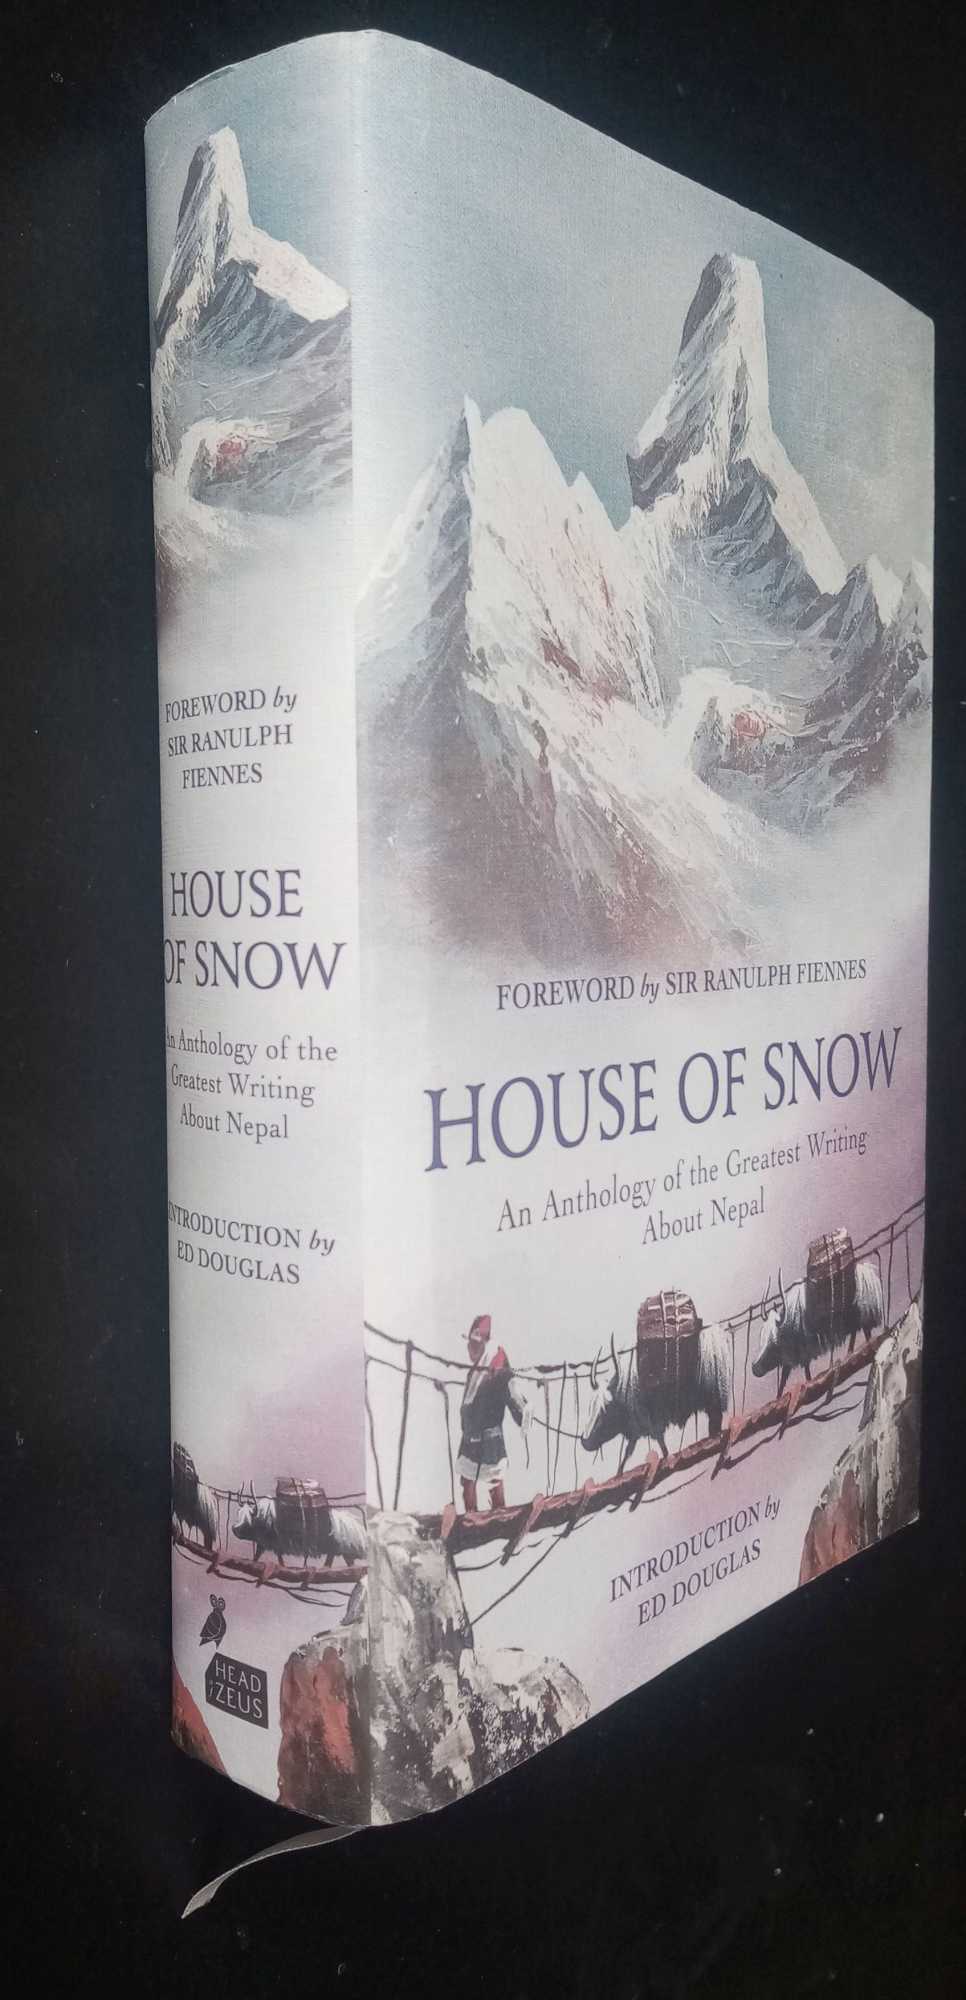 Ed Douglas, intro. - House of Snow: An Anthology of the Greatest Writing About Nepal